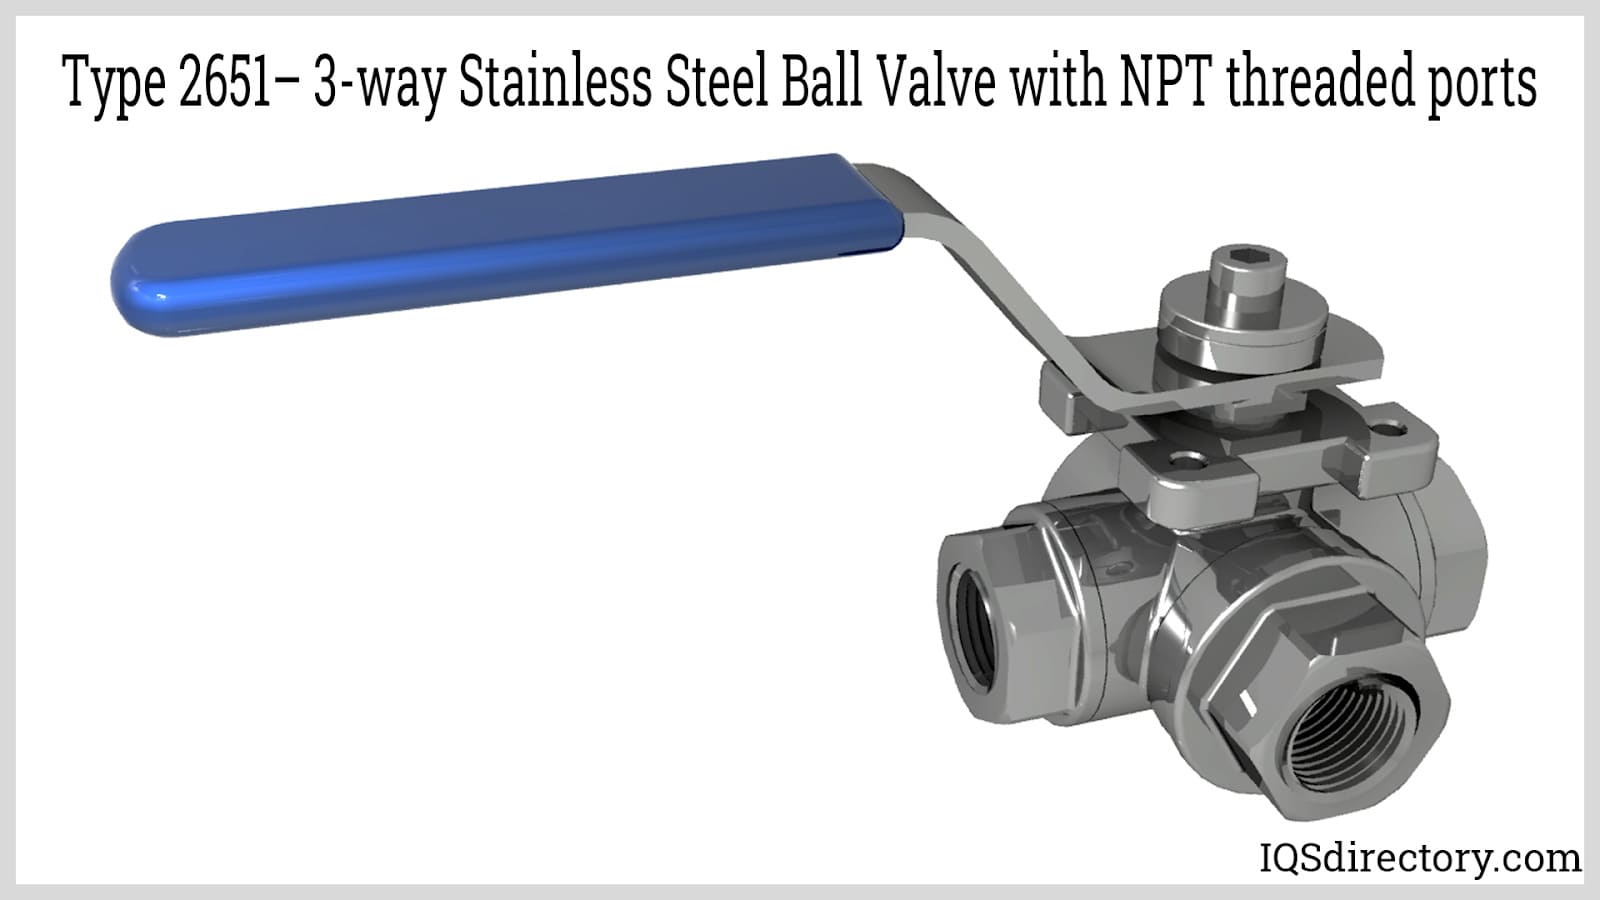 Type 2651– 3-way Stainless Steel Ball Valve with NPT threaded ports